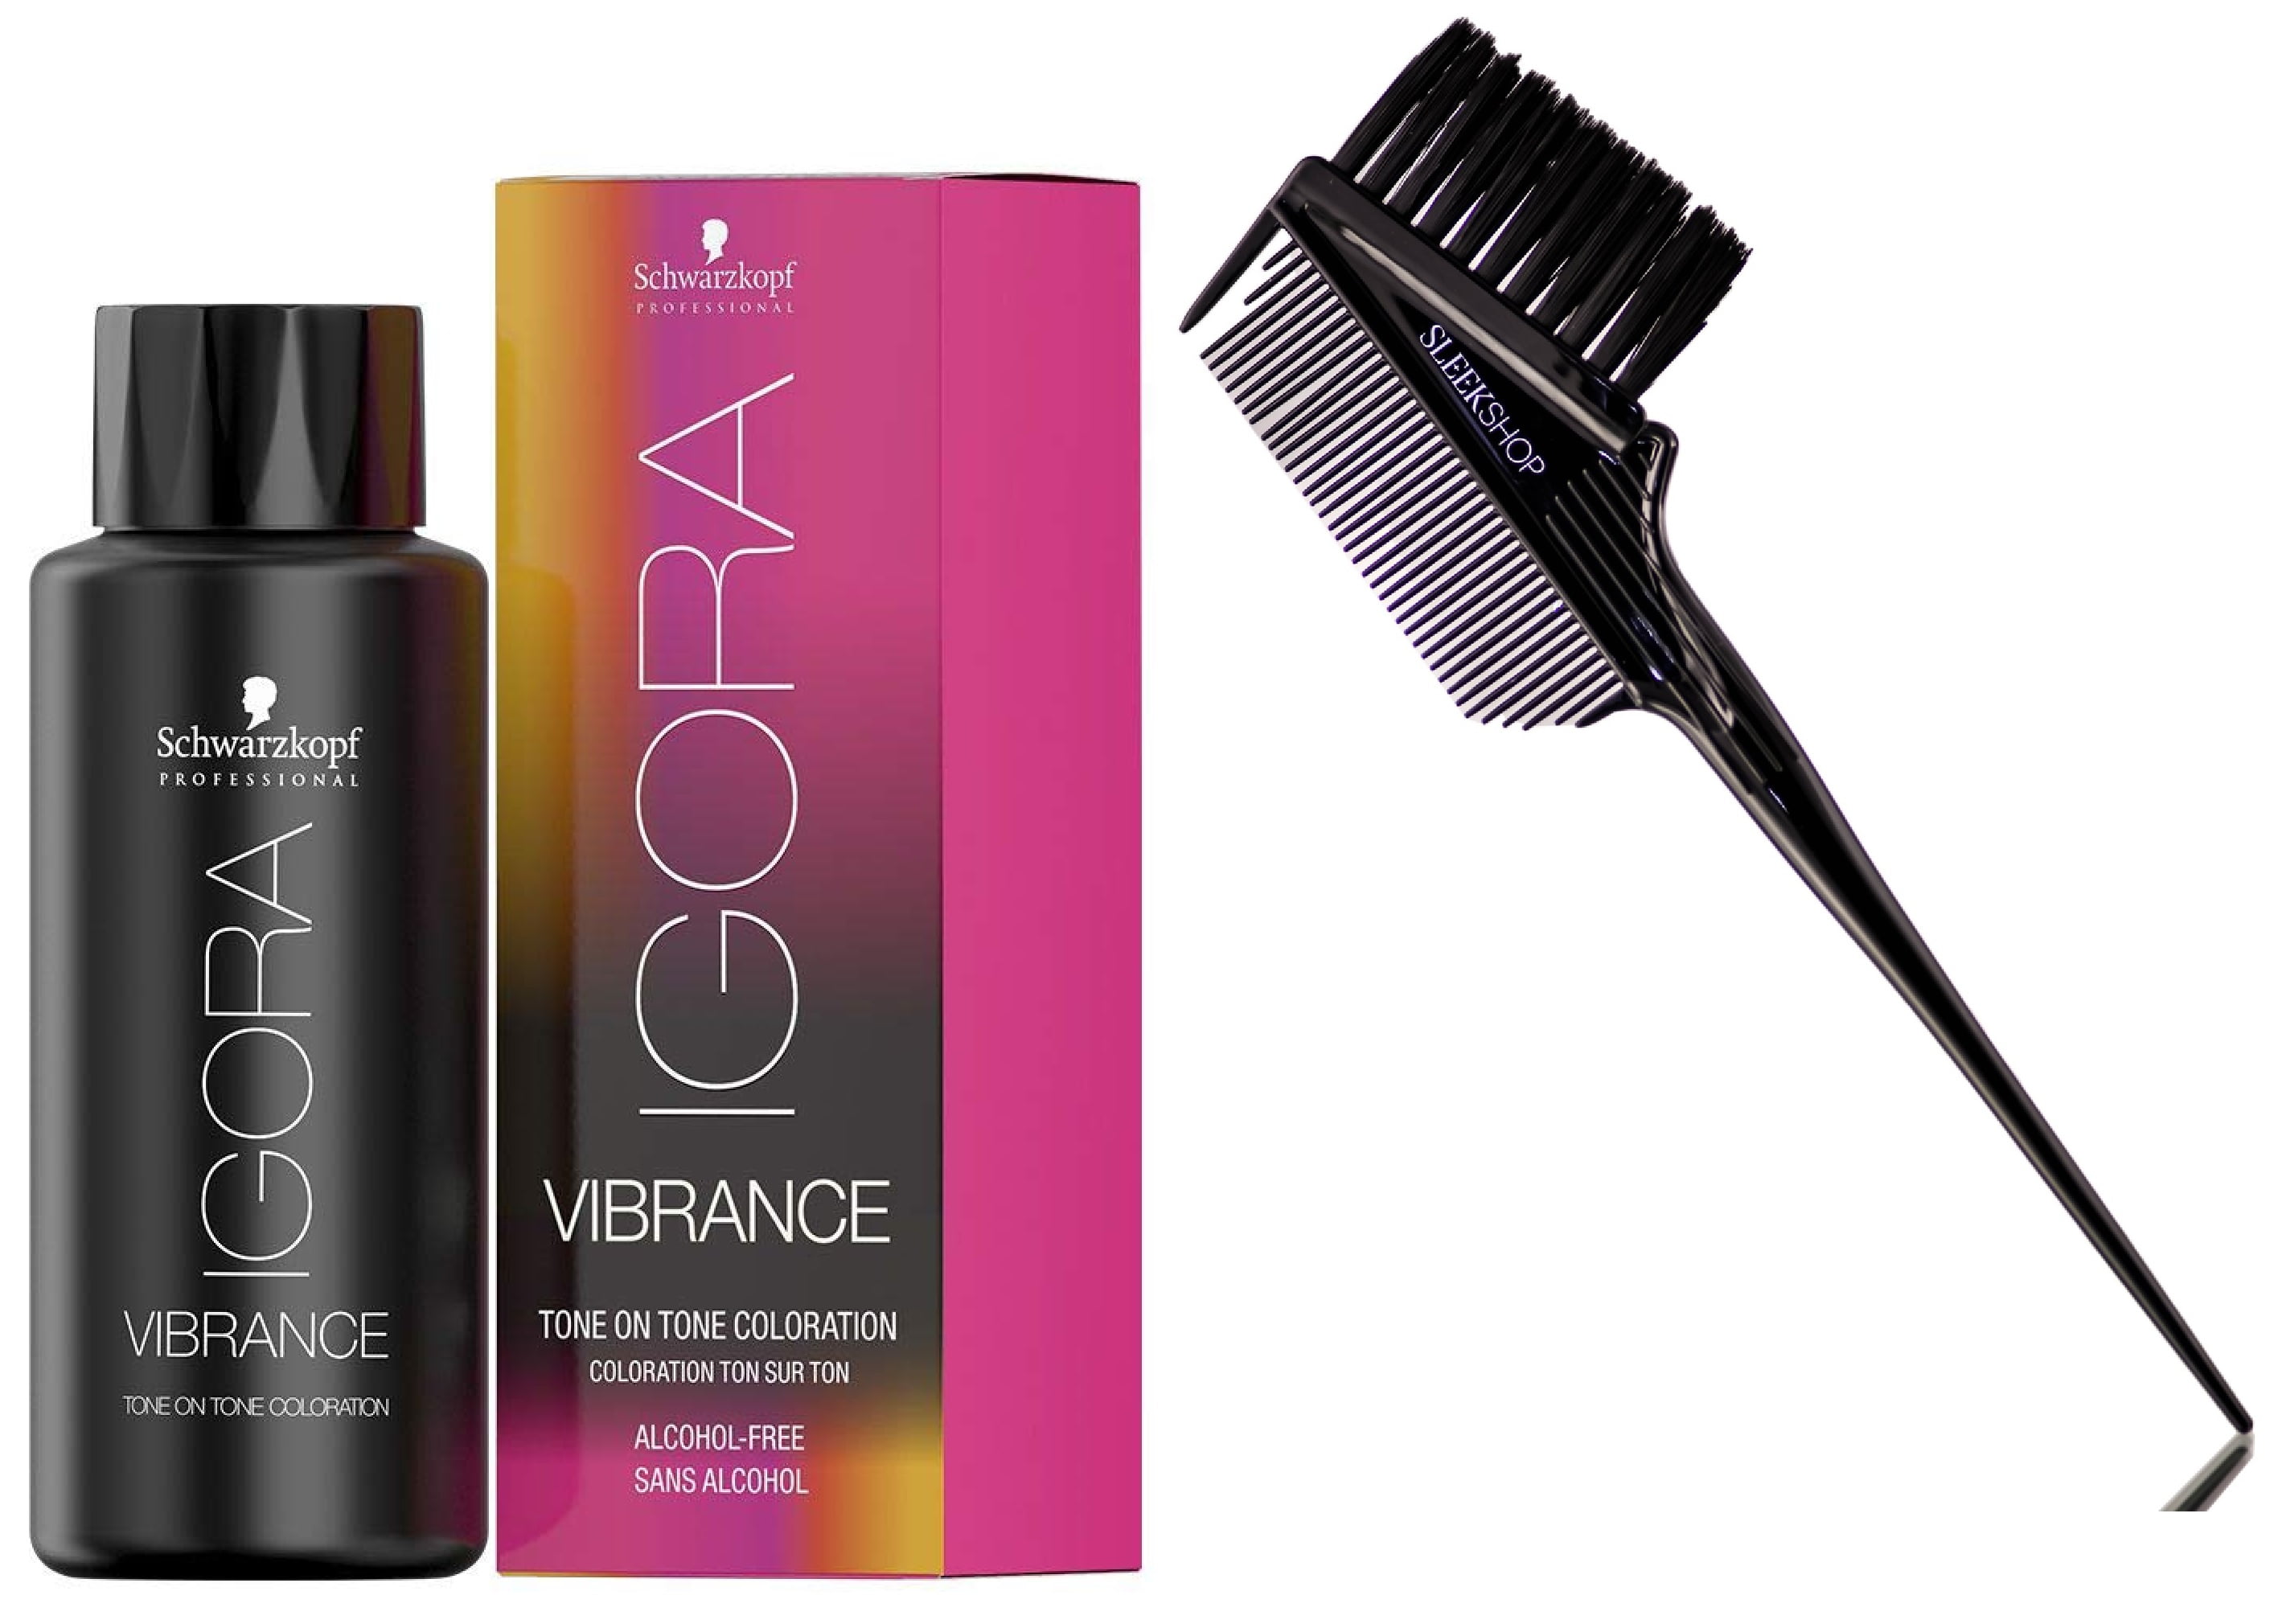 Schwarzkopf : 7-1, Vibrance Tone on Tone Coloration Demi-Permanent Hair Color Haircolor - Pack of 2 w/ Sleek 3-in-1 Brush Comb - Walmart.com